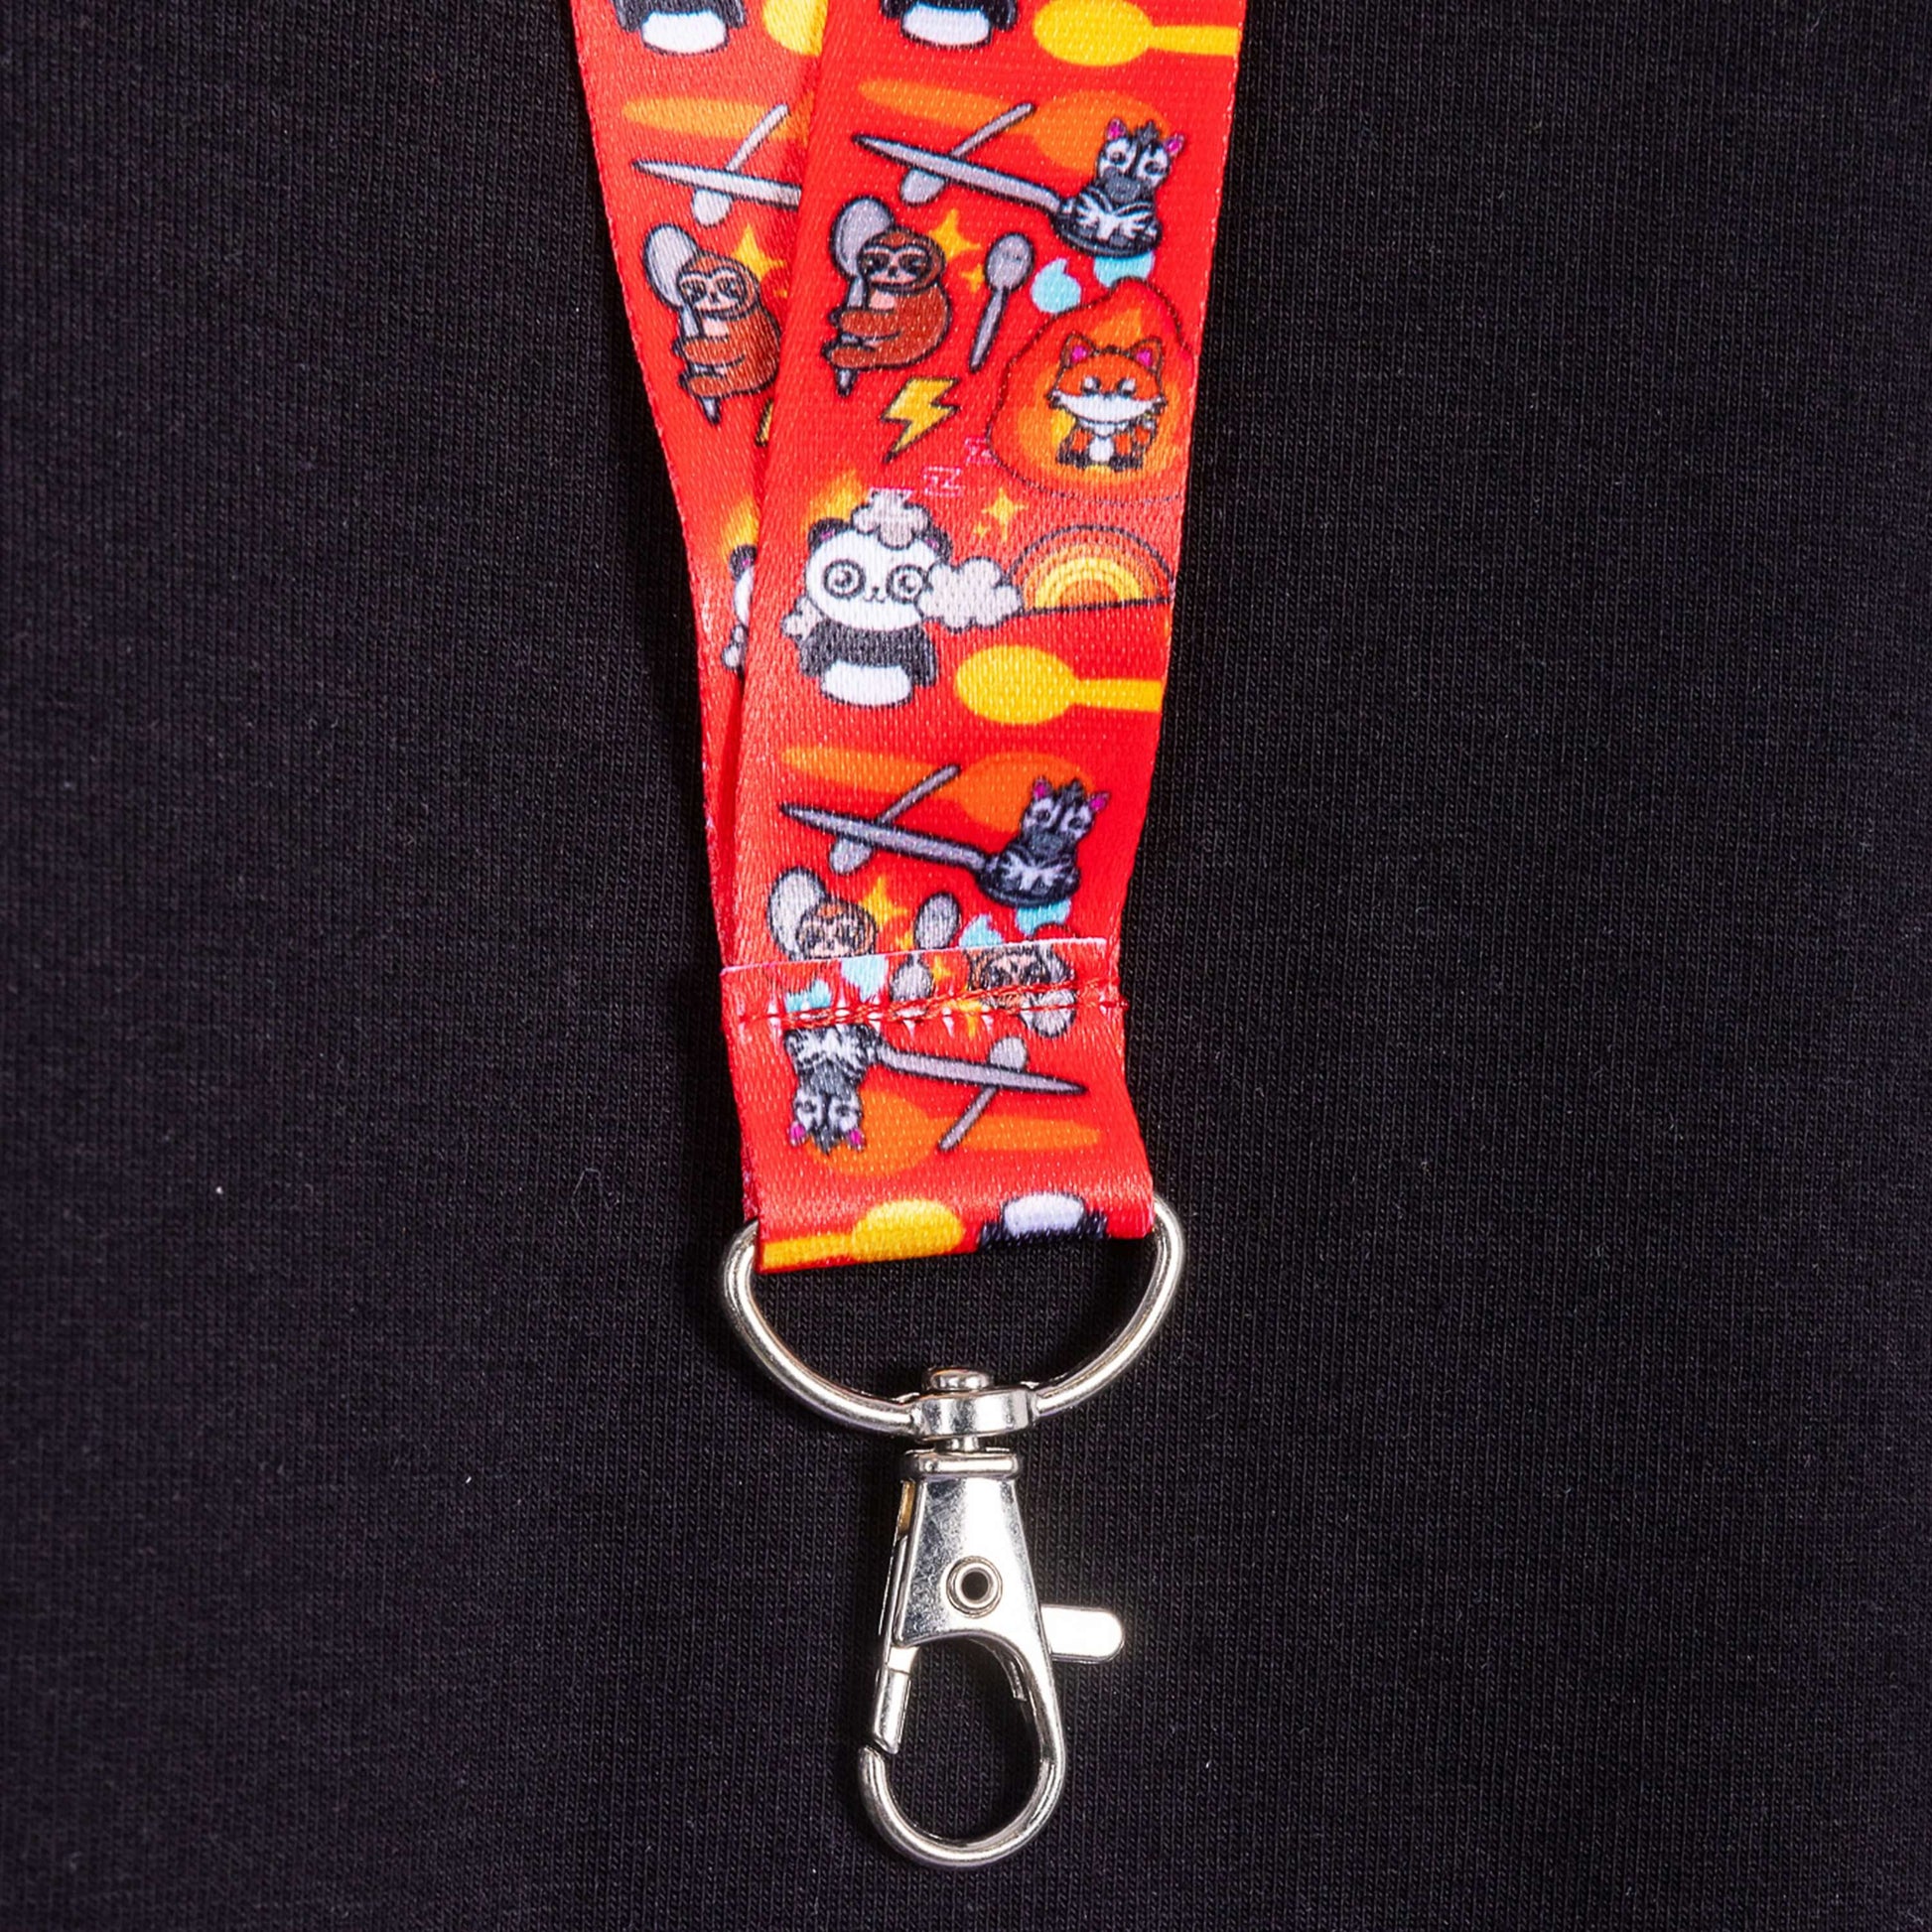 close up of the red lanyard featuring Spoonie characters by Innabox, spoons and rainbows with the metal clasp hanging from it against a black background